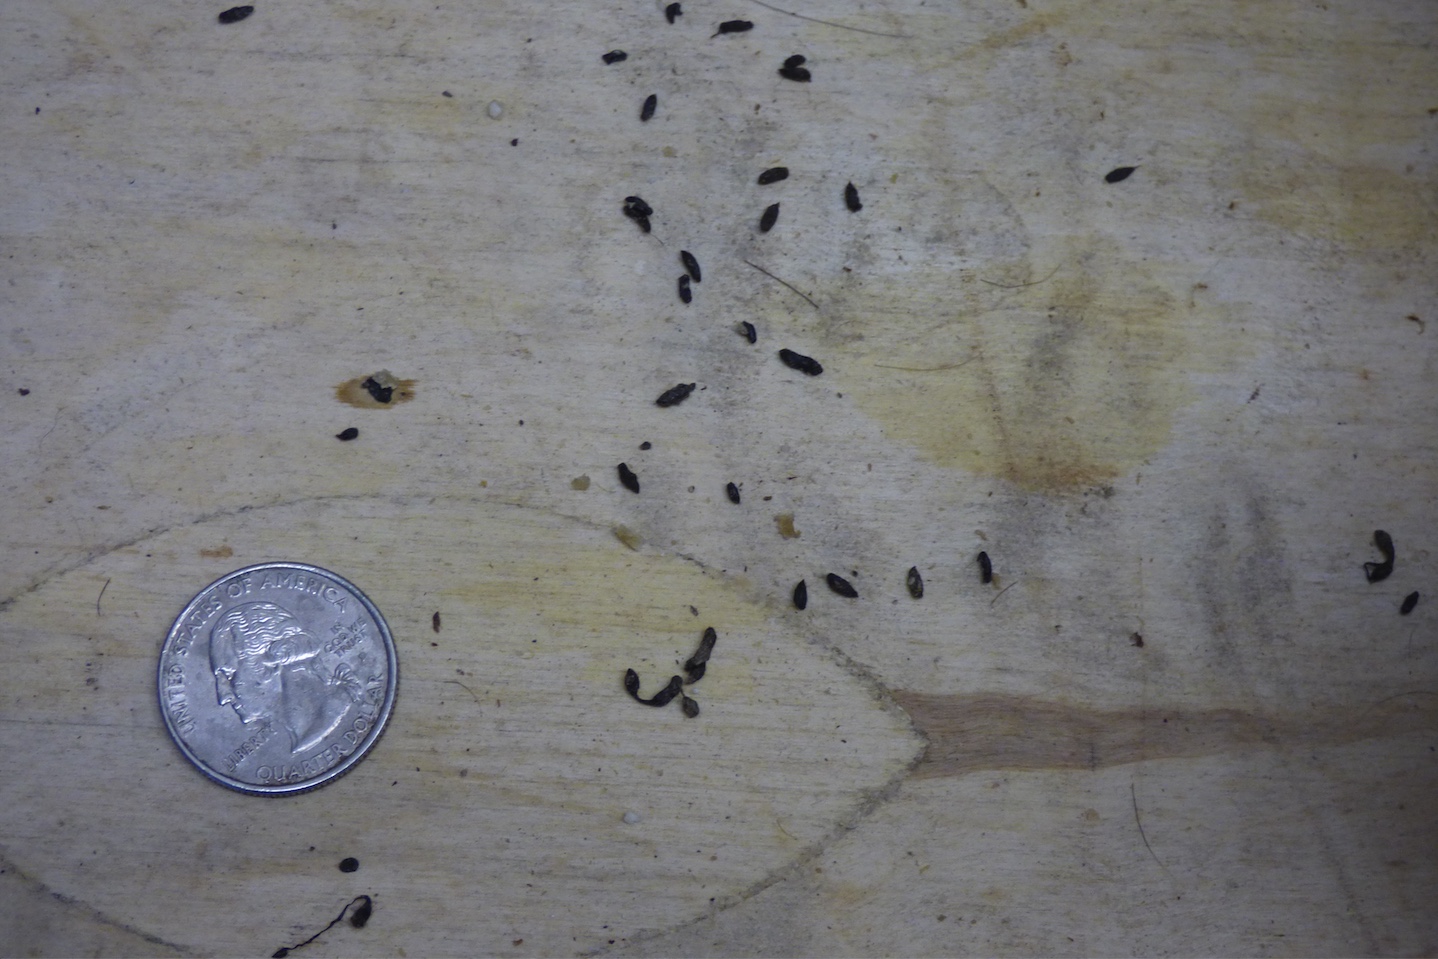 Mouse droppings with a quarter nearby for scale.